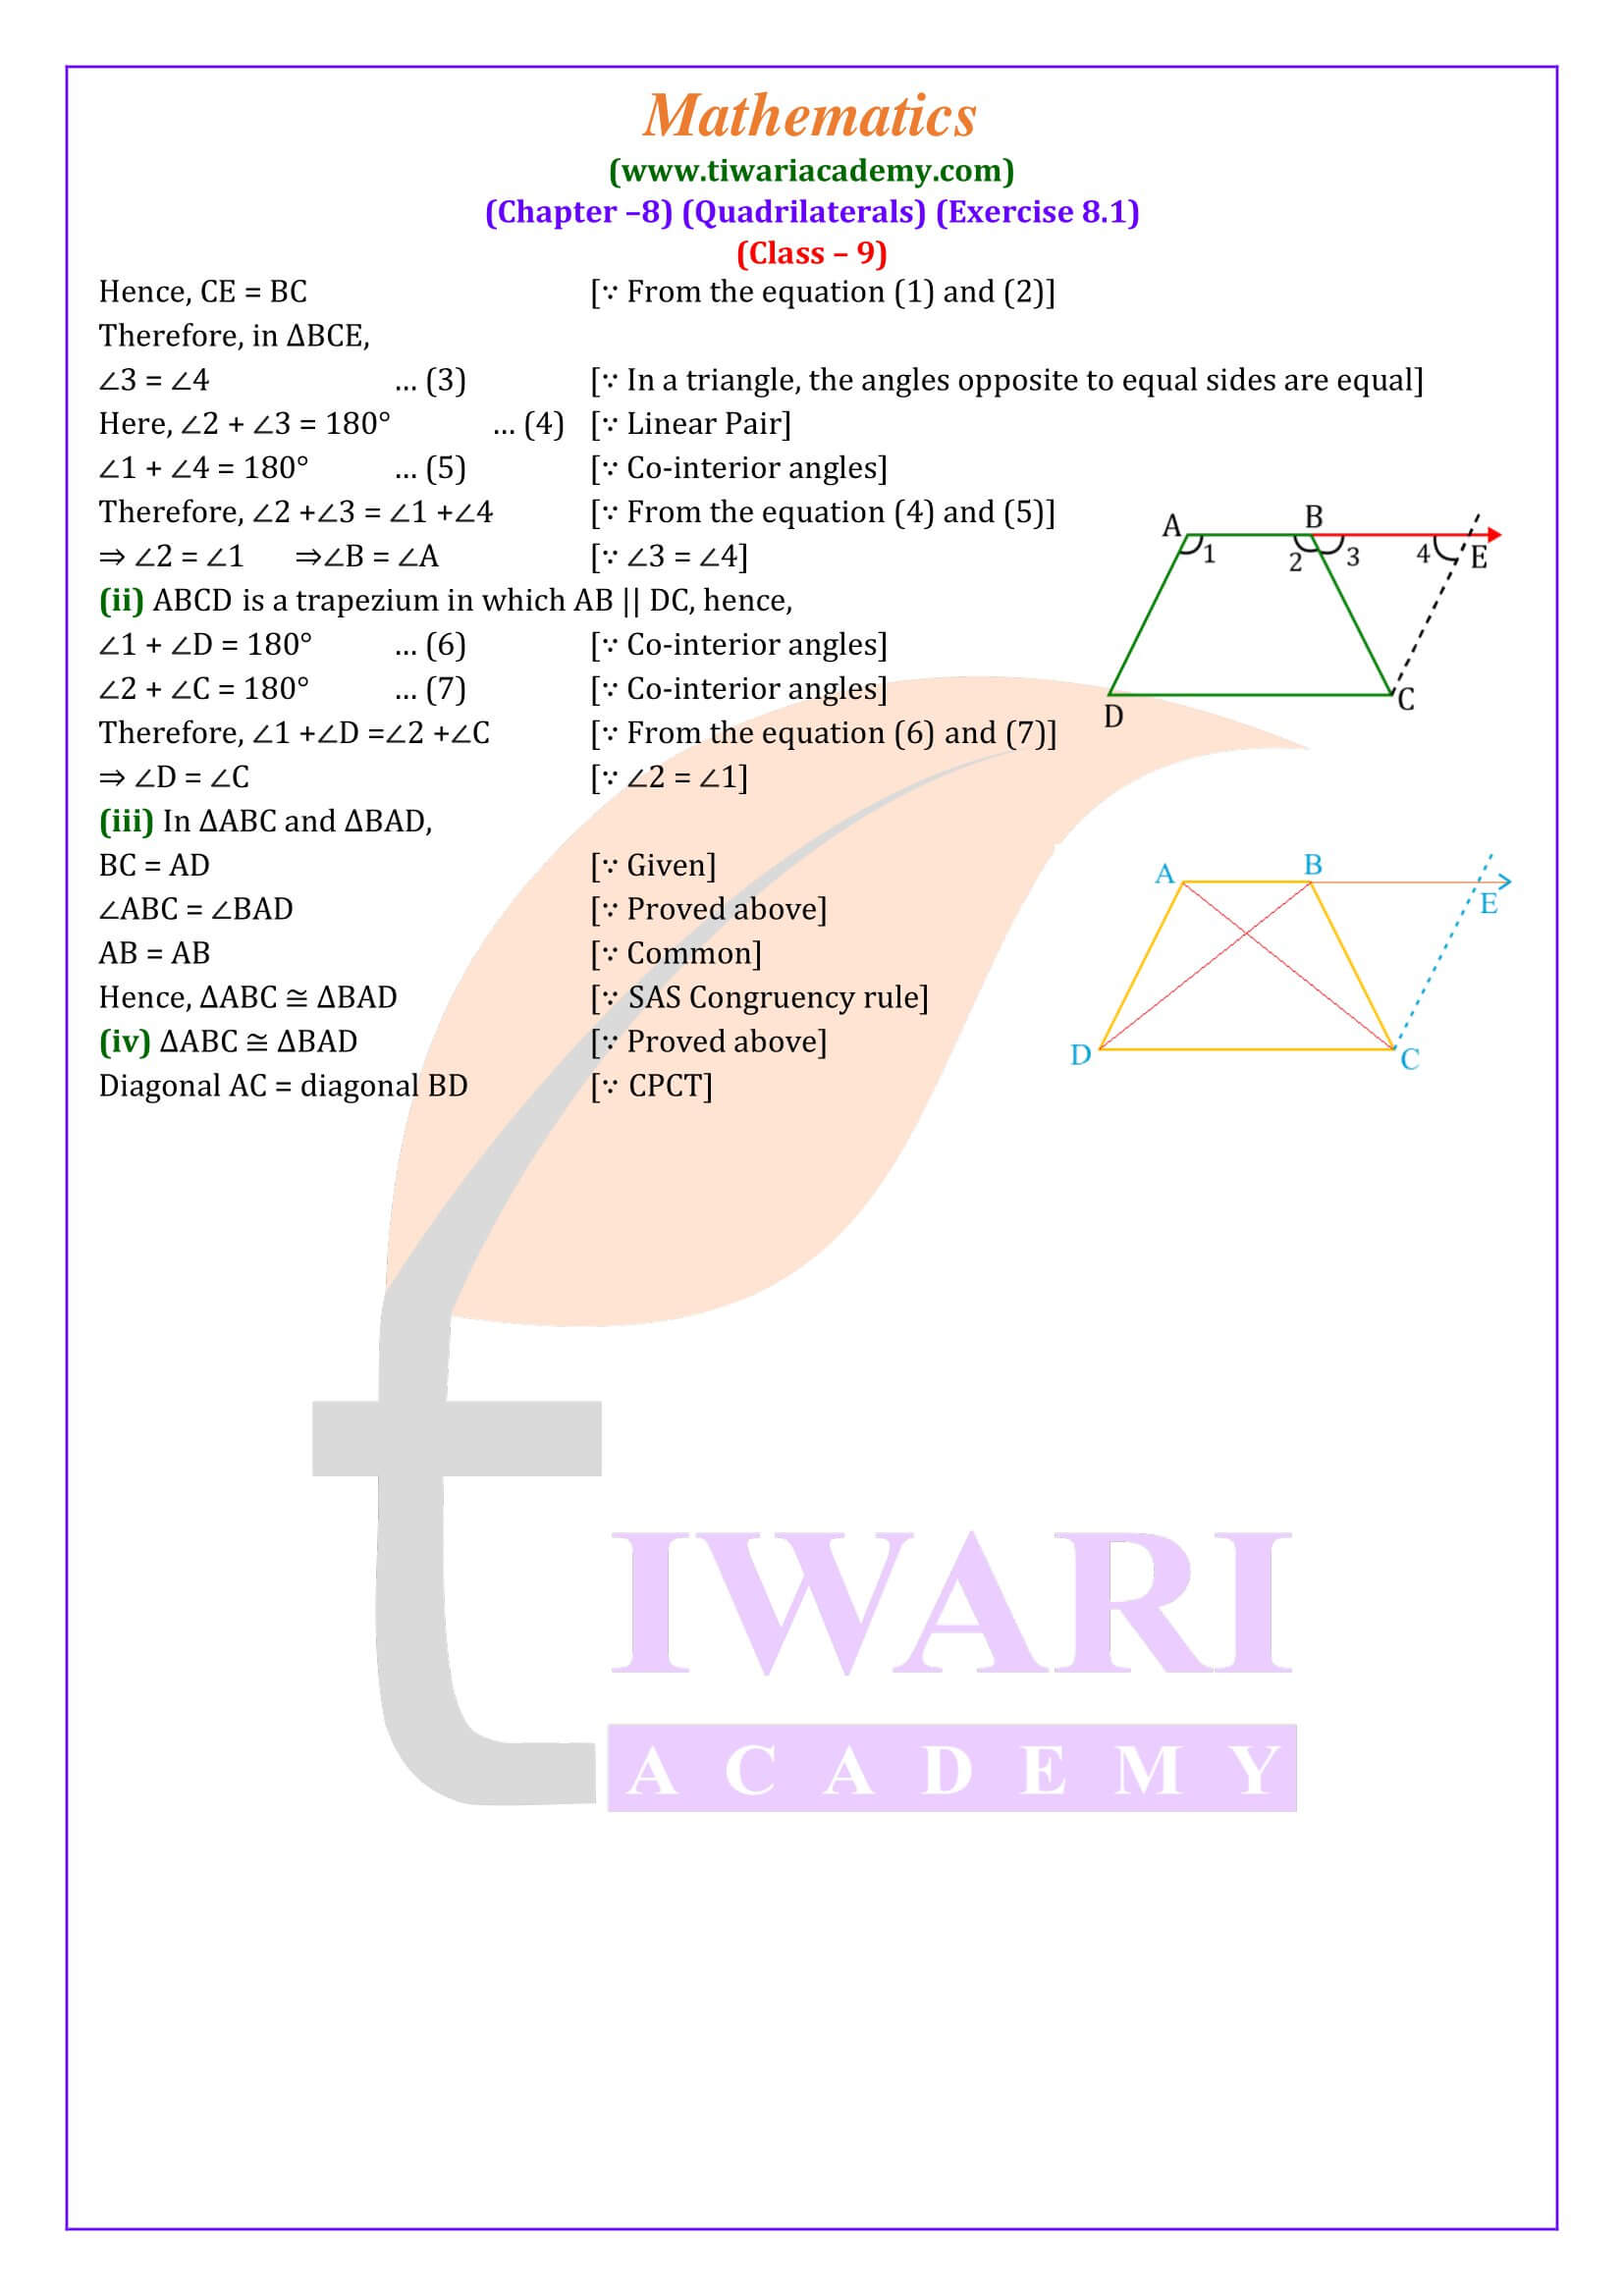 Class 9 Maths Exercise 8.1 solutions updated for new session